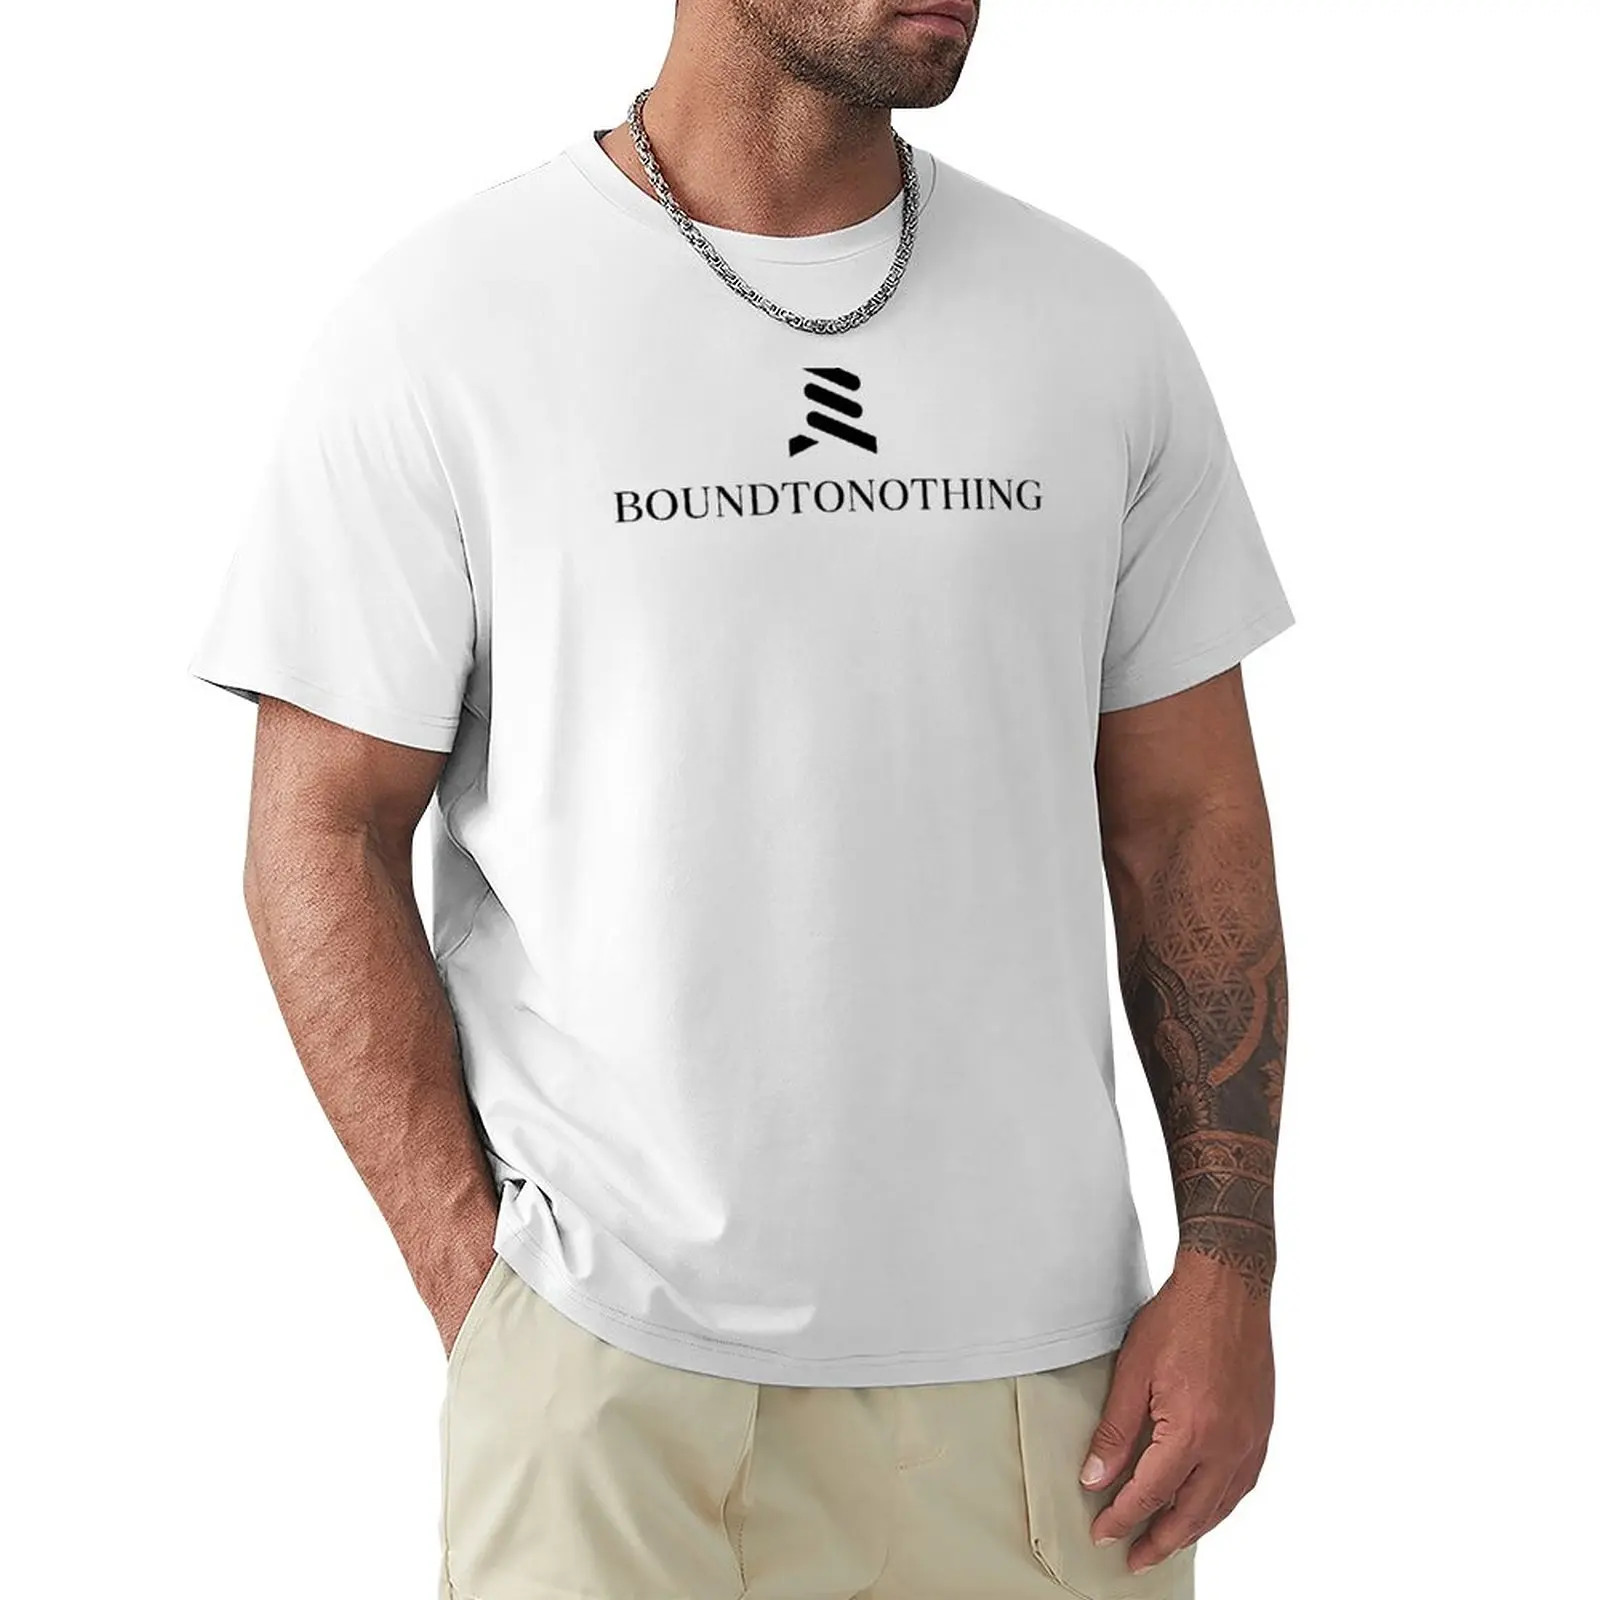 BoundToNothing T-Shirt sublime aesthetic clothes graphics t shirts for men graphic